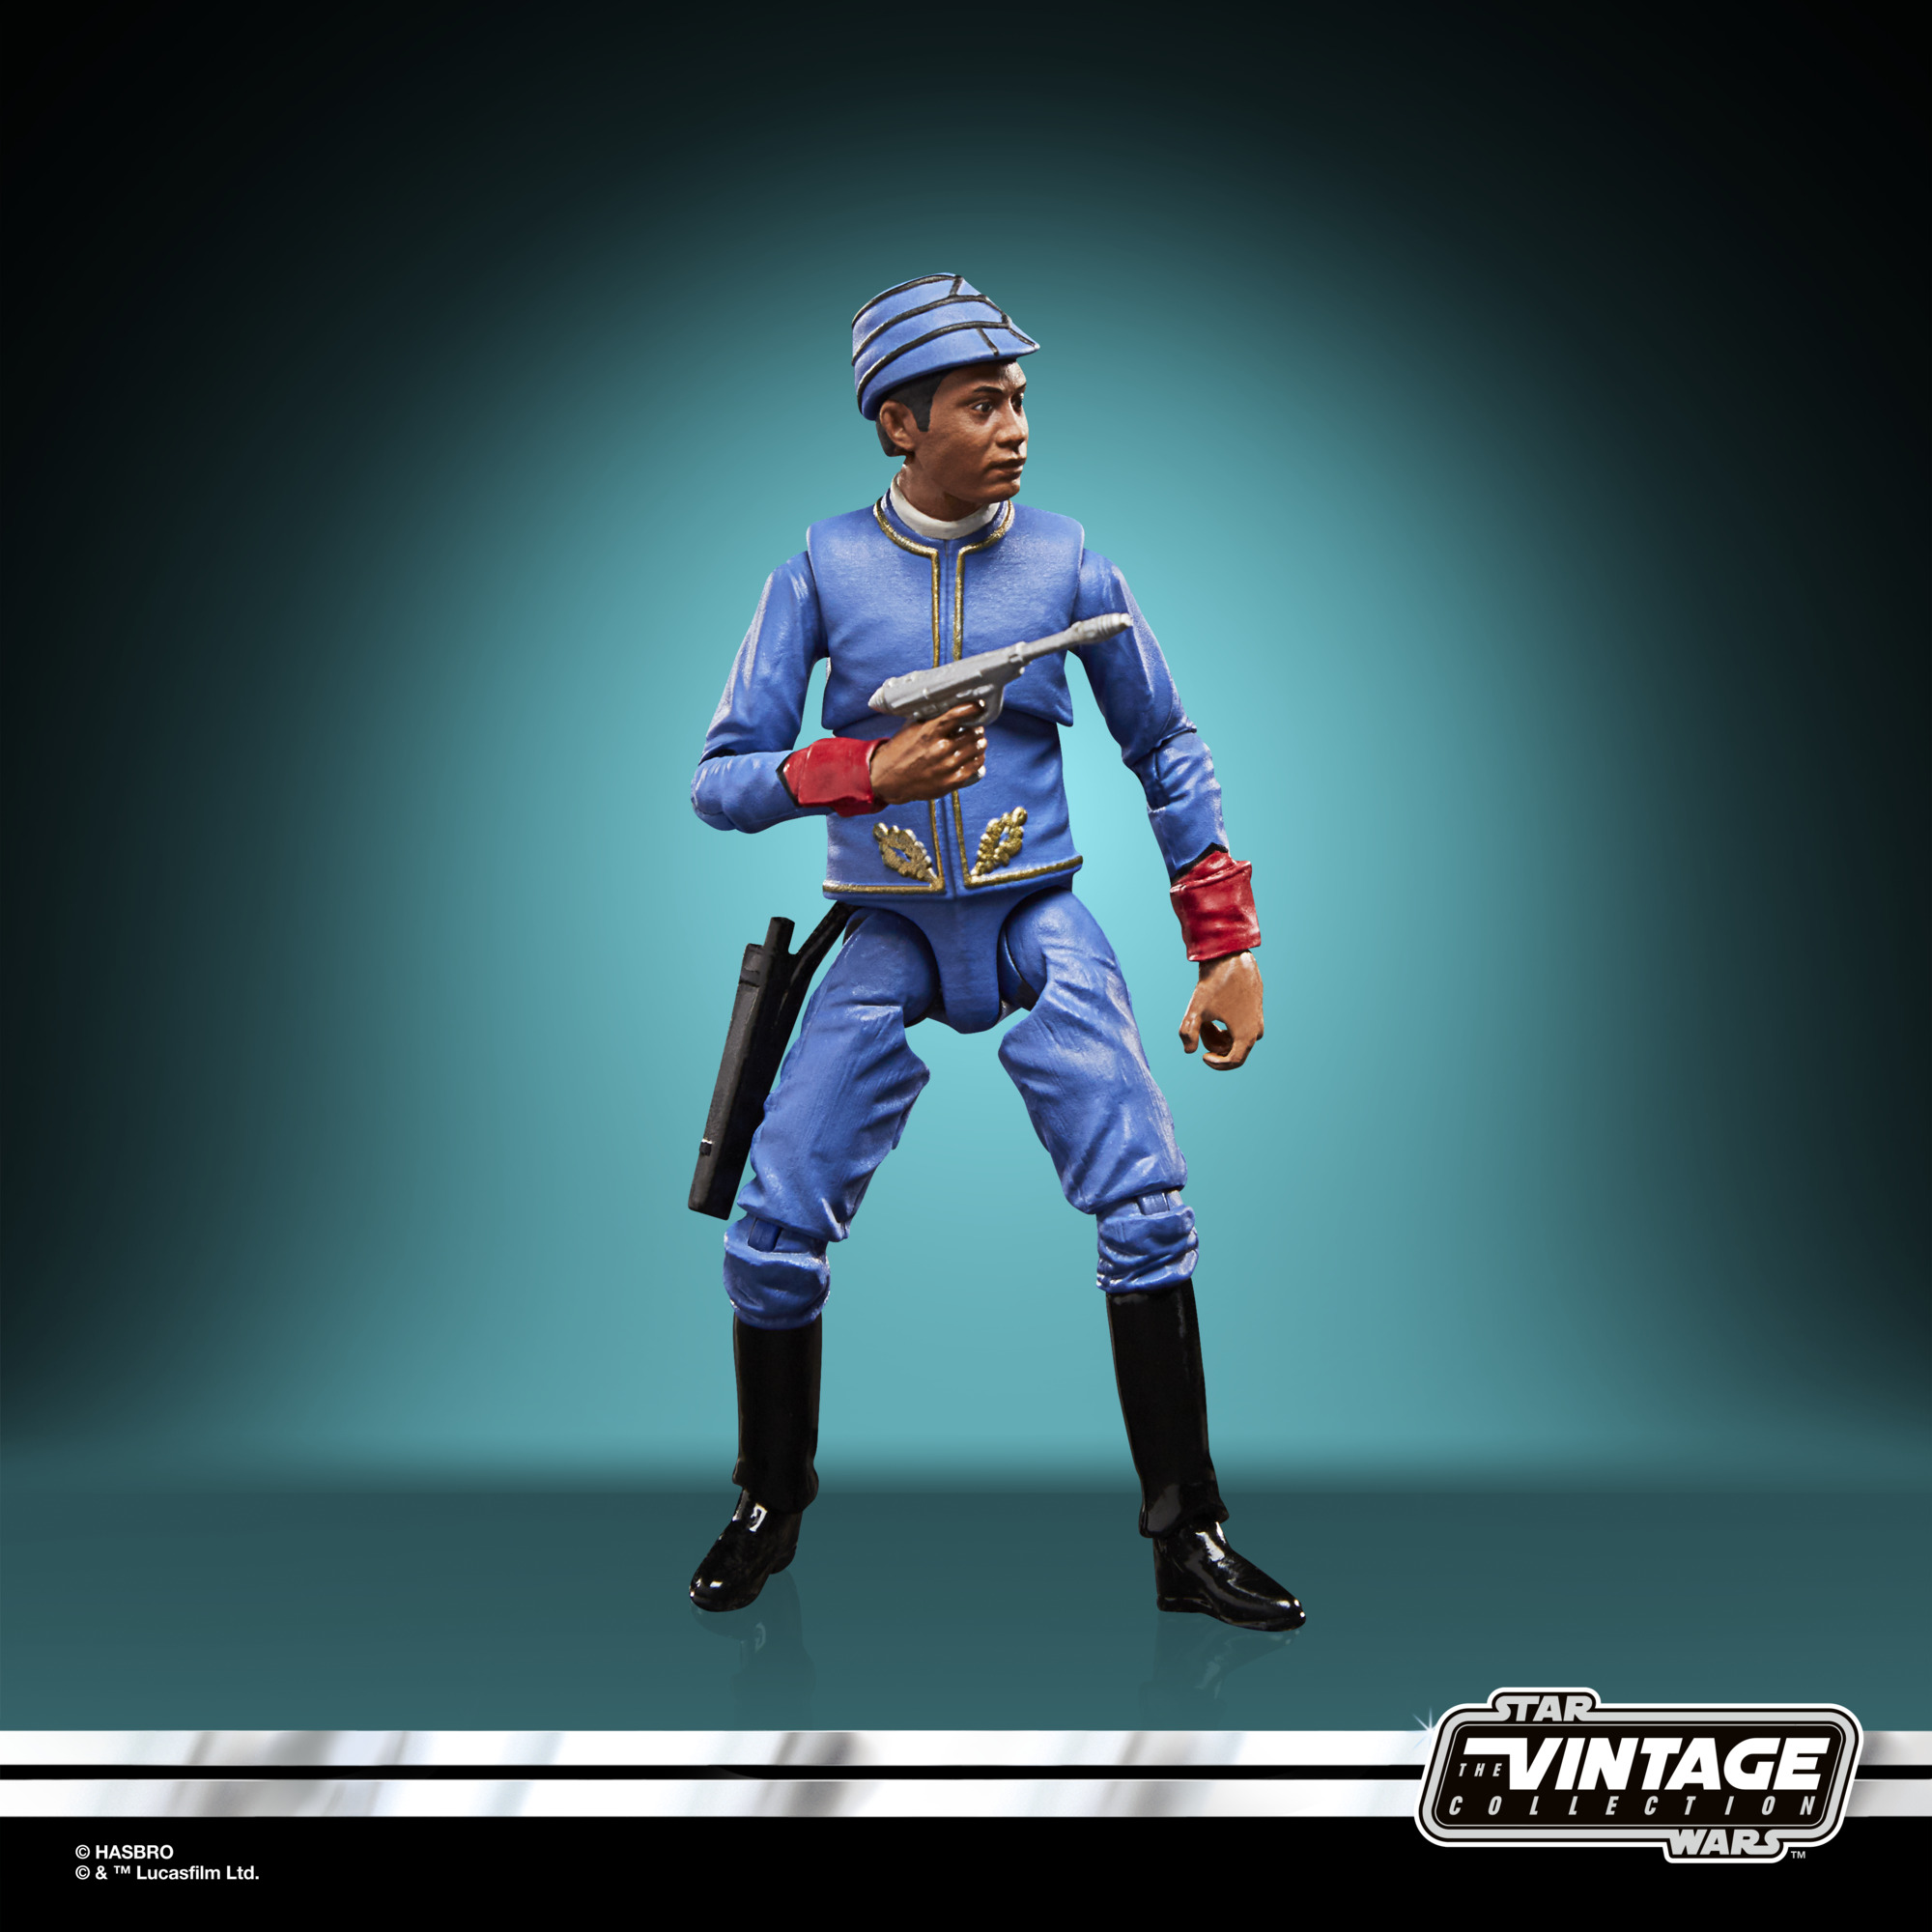 Star Wars The Vintage Collection Bespin Security Guard (Isdam Edian) F63715L00 5010994175474